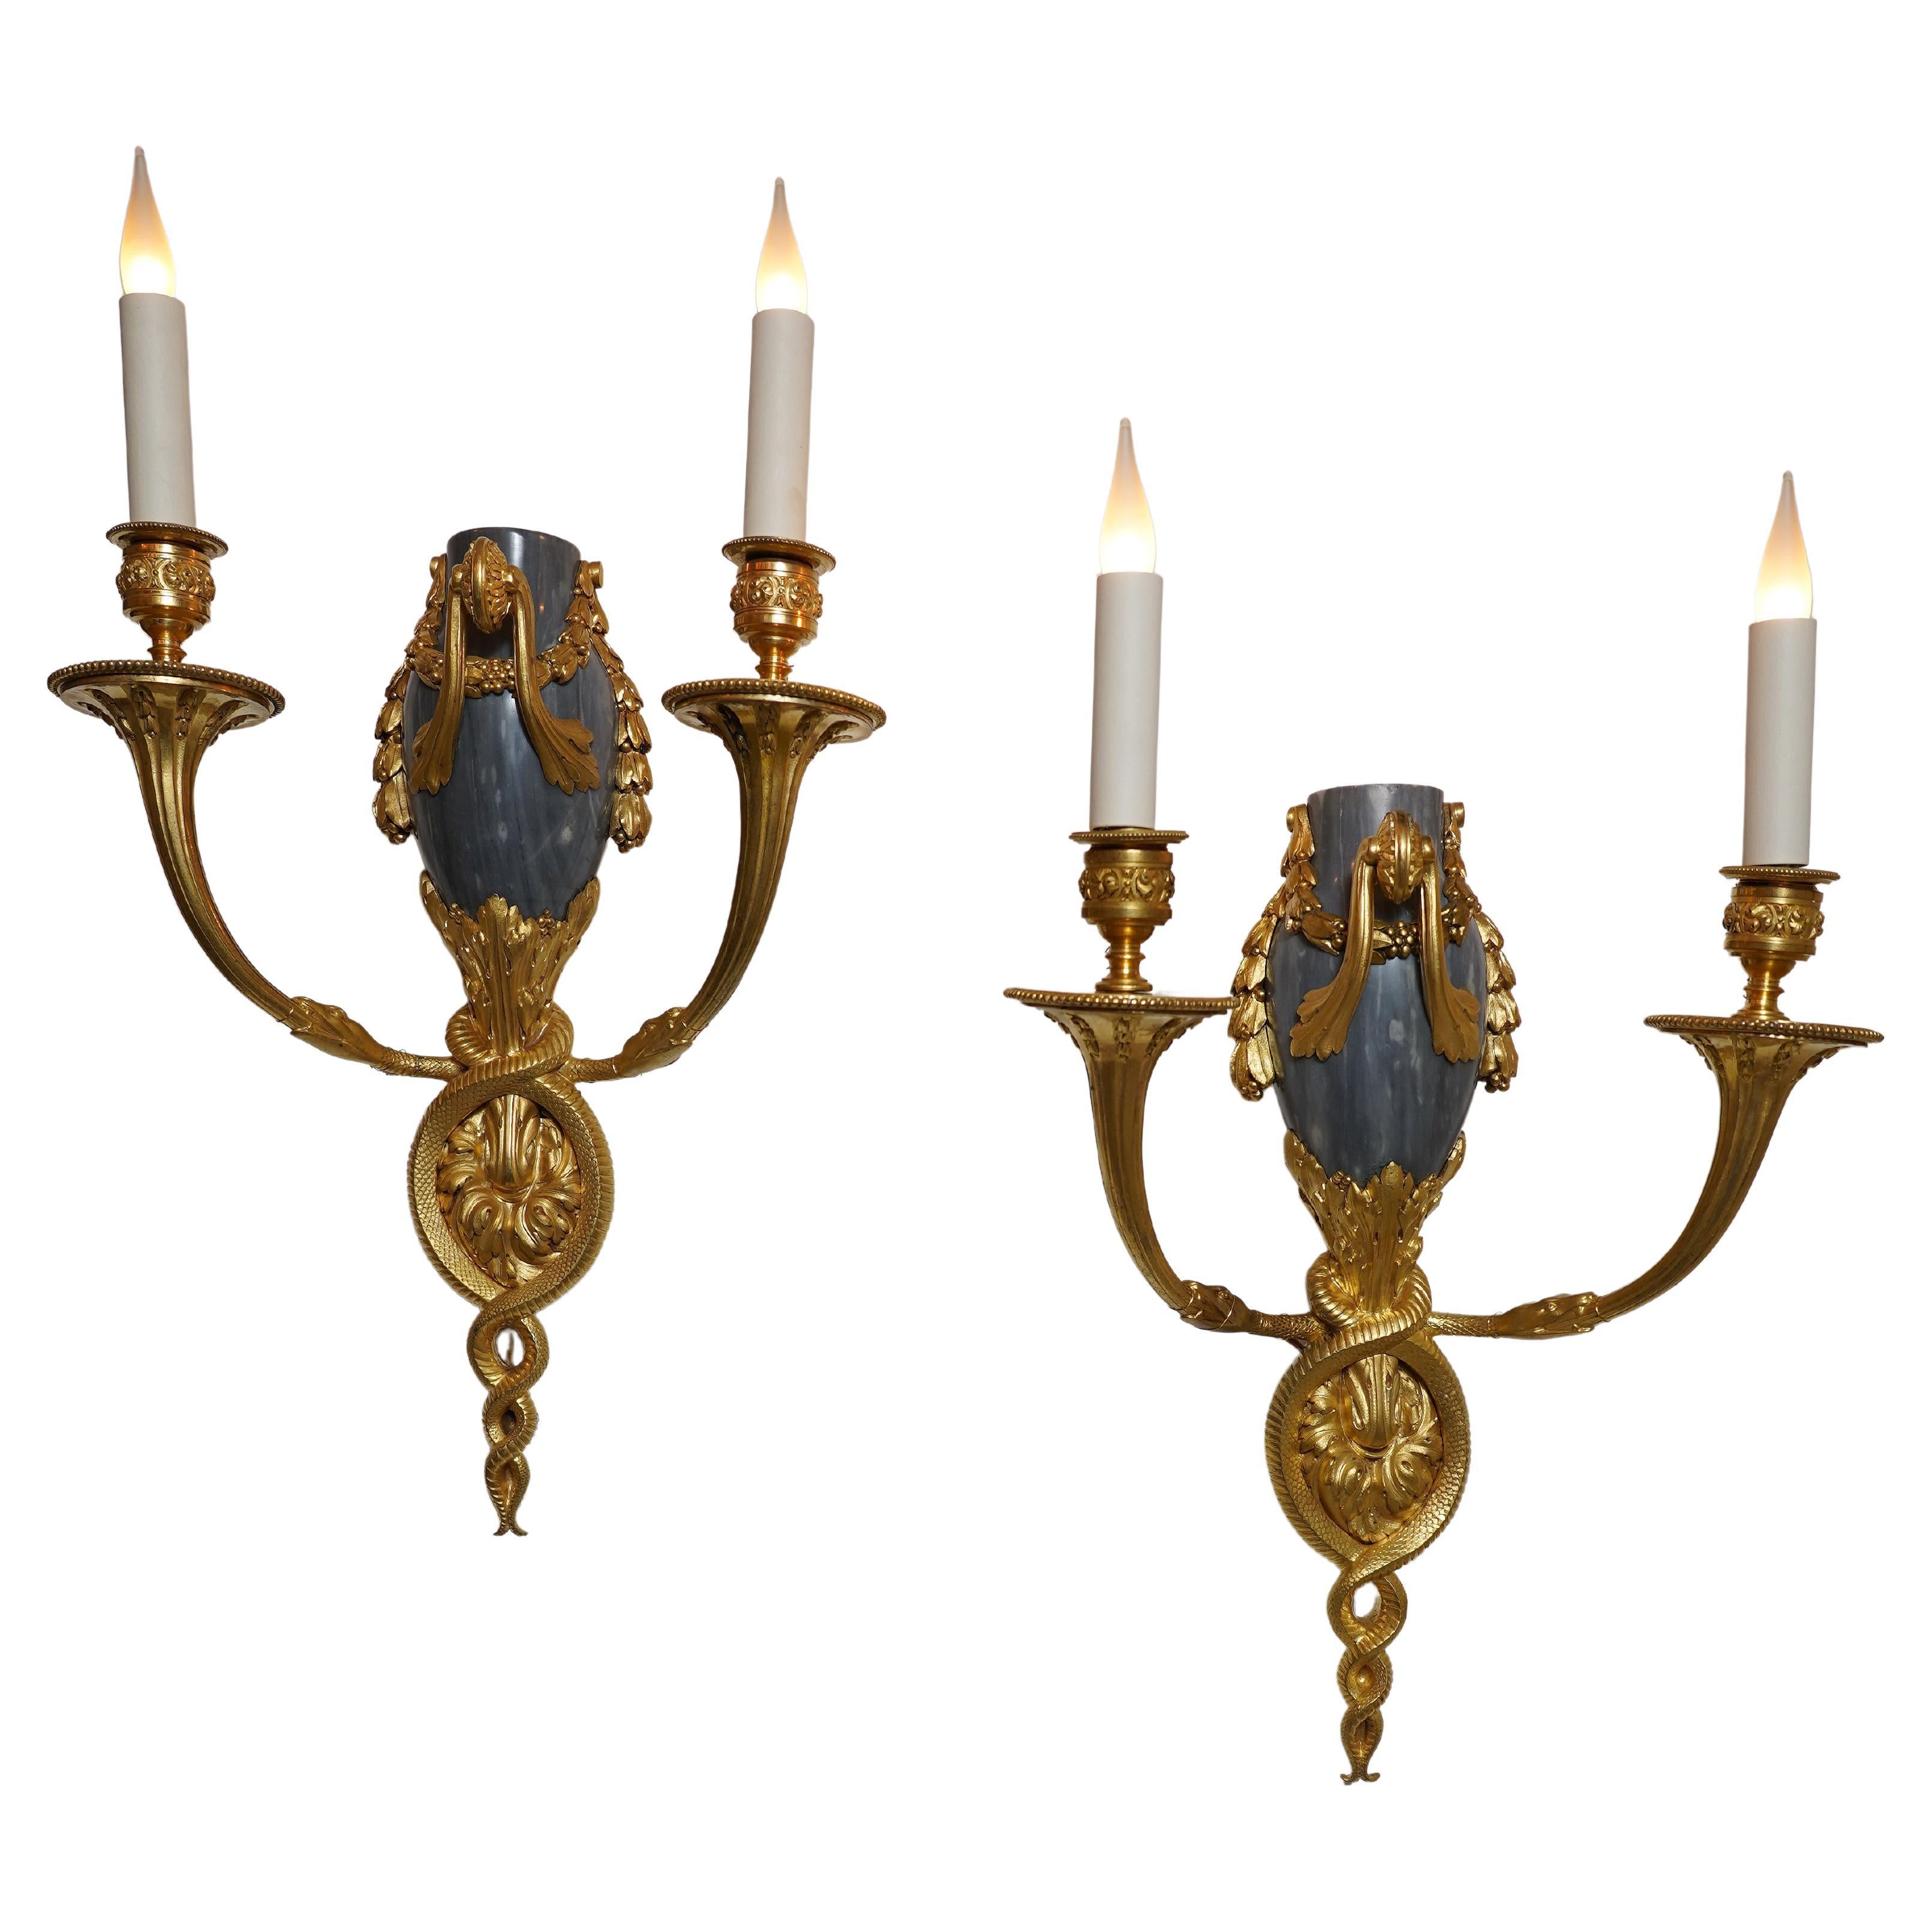 Pair of Gilded Bronze and Marble Wall-Lights attr. to H. Dasson, France, c 1880